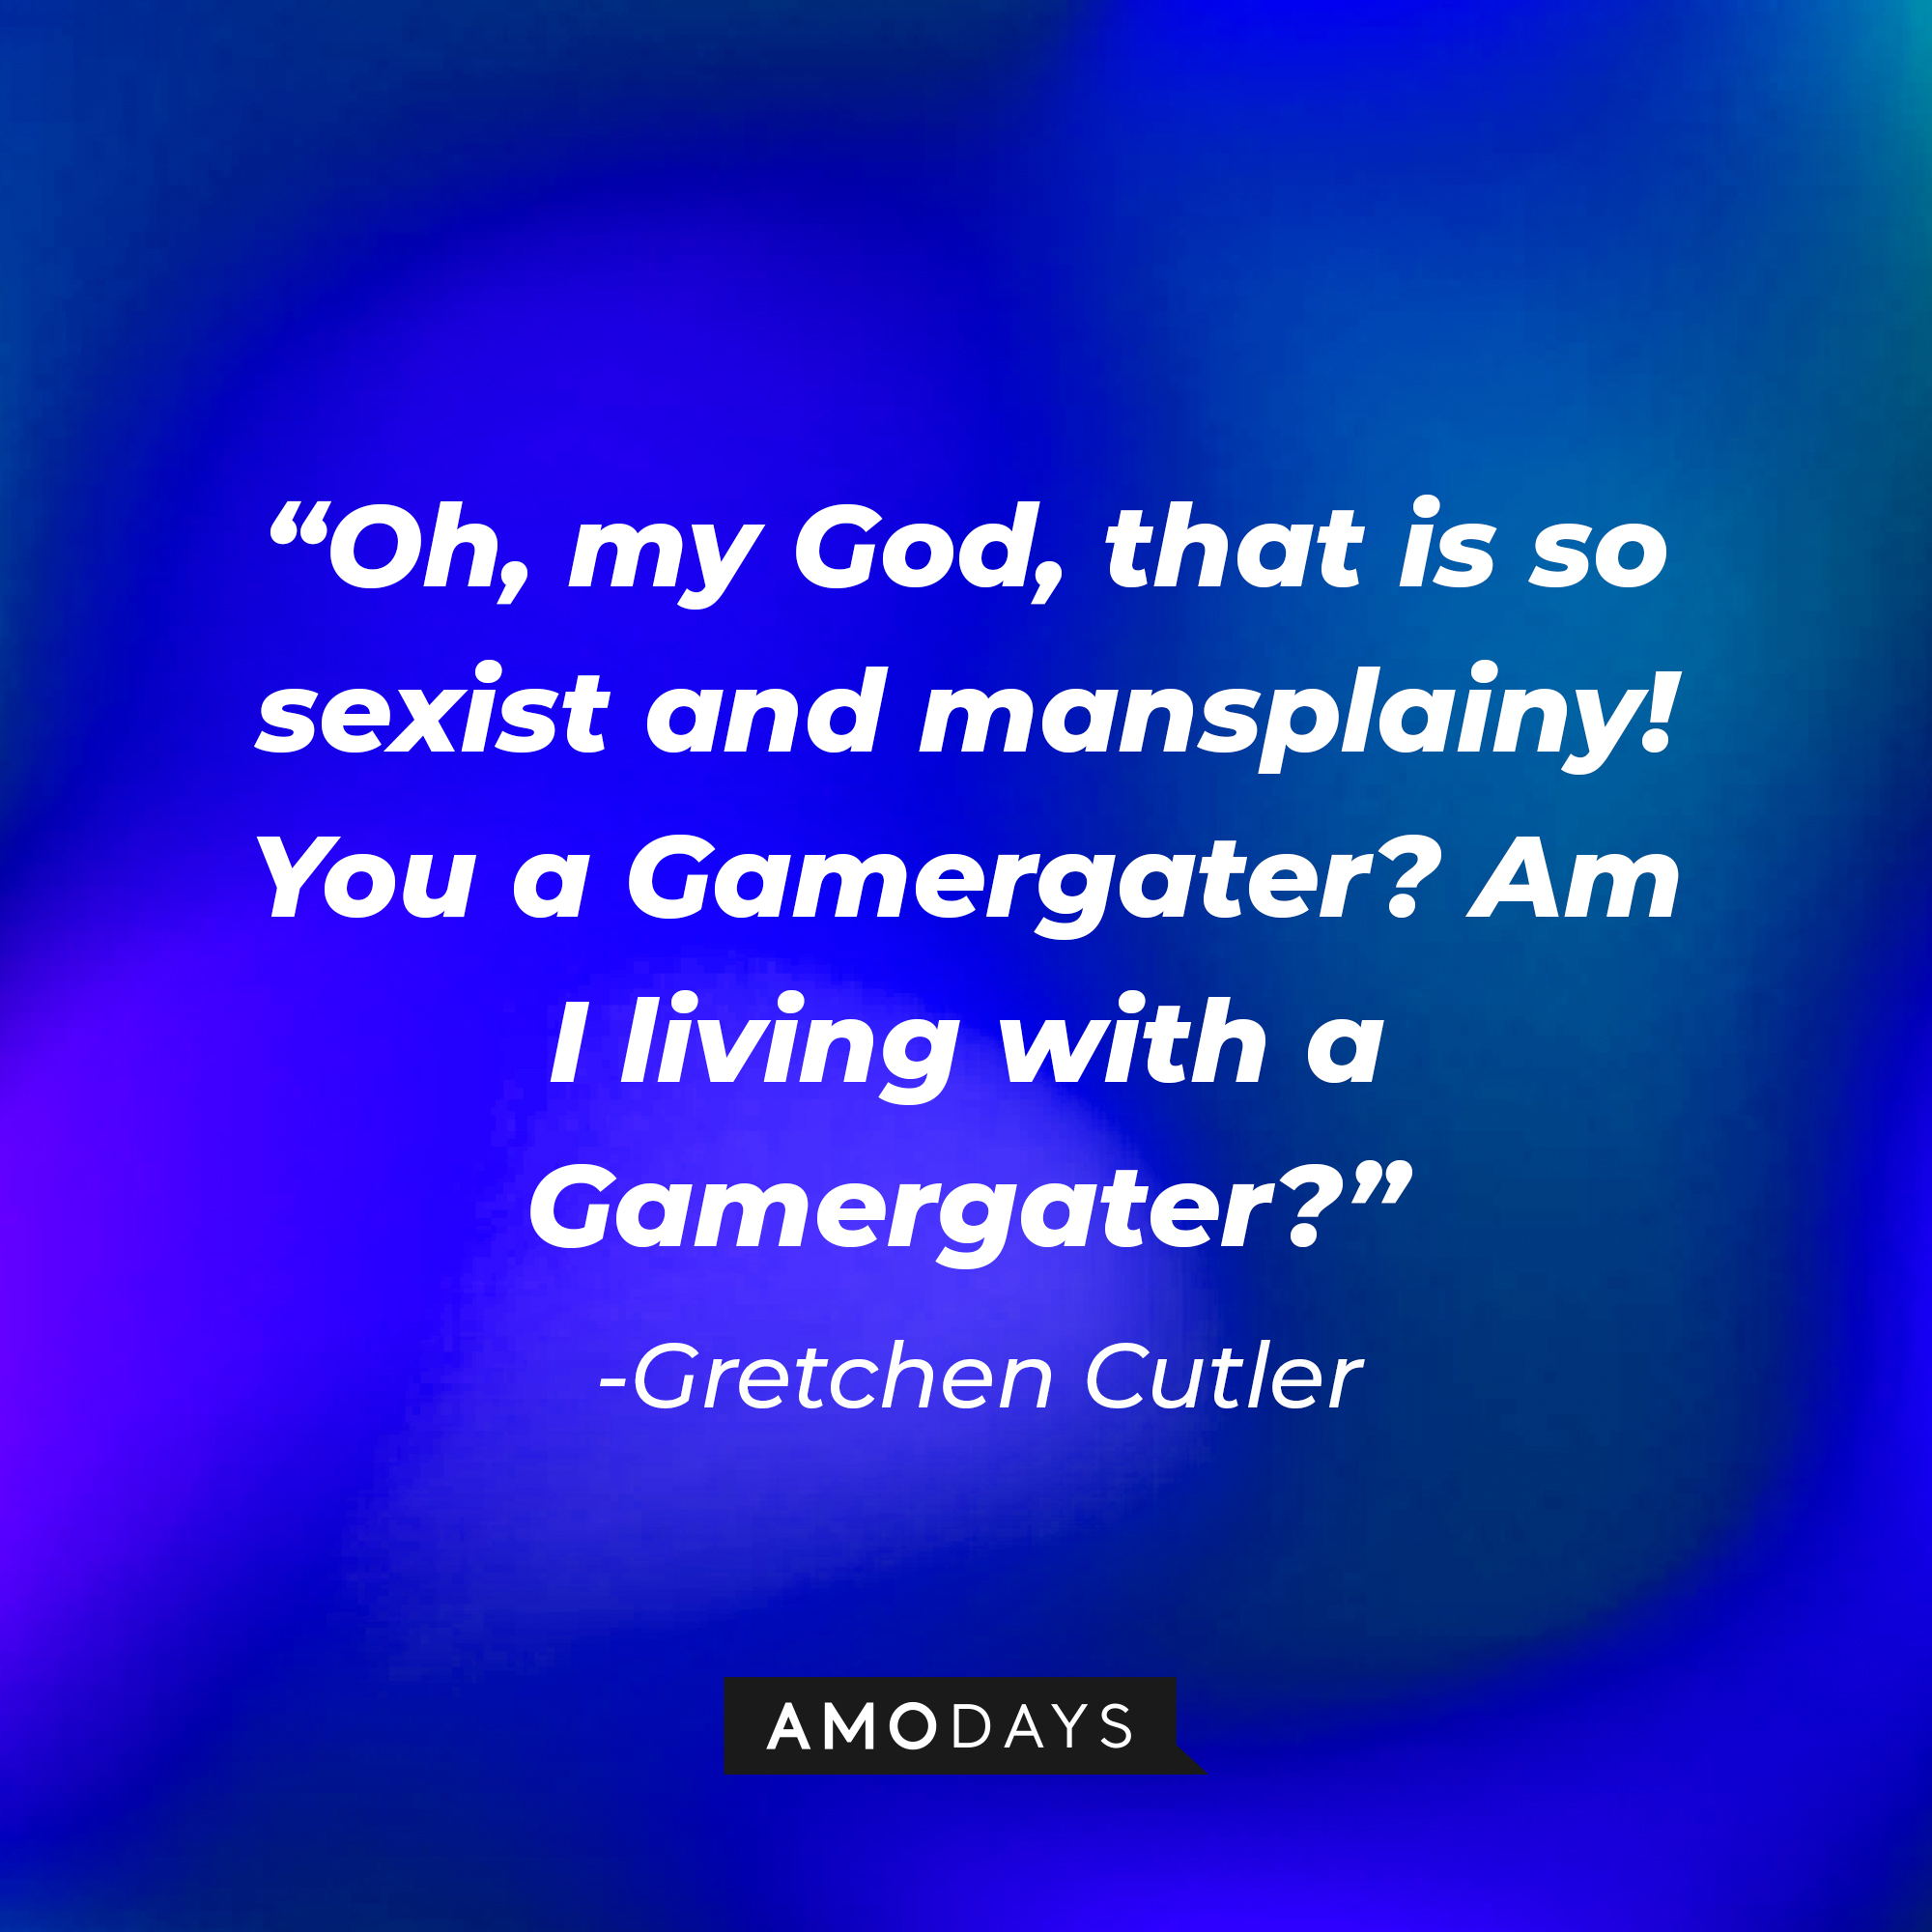 Gretchen Cutler’s quote: “Oh, my God, that is so sexist and mansplainy! You a Gamergater? Am I living with a Gamergater?” | Source: AmoDays